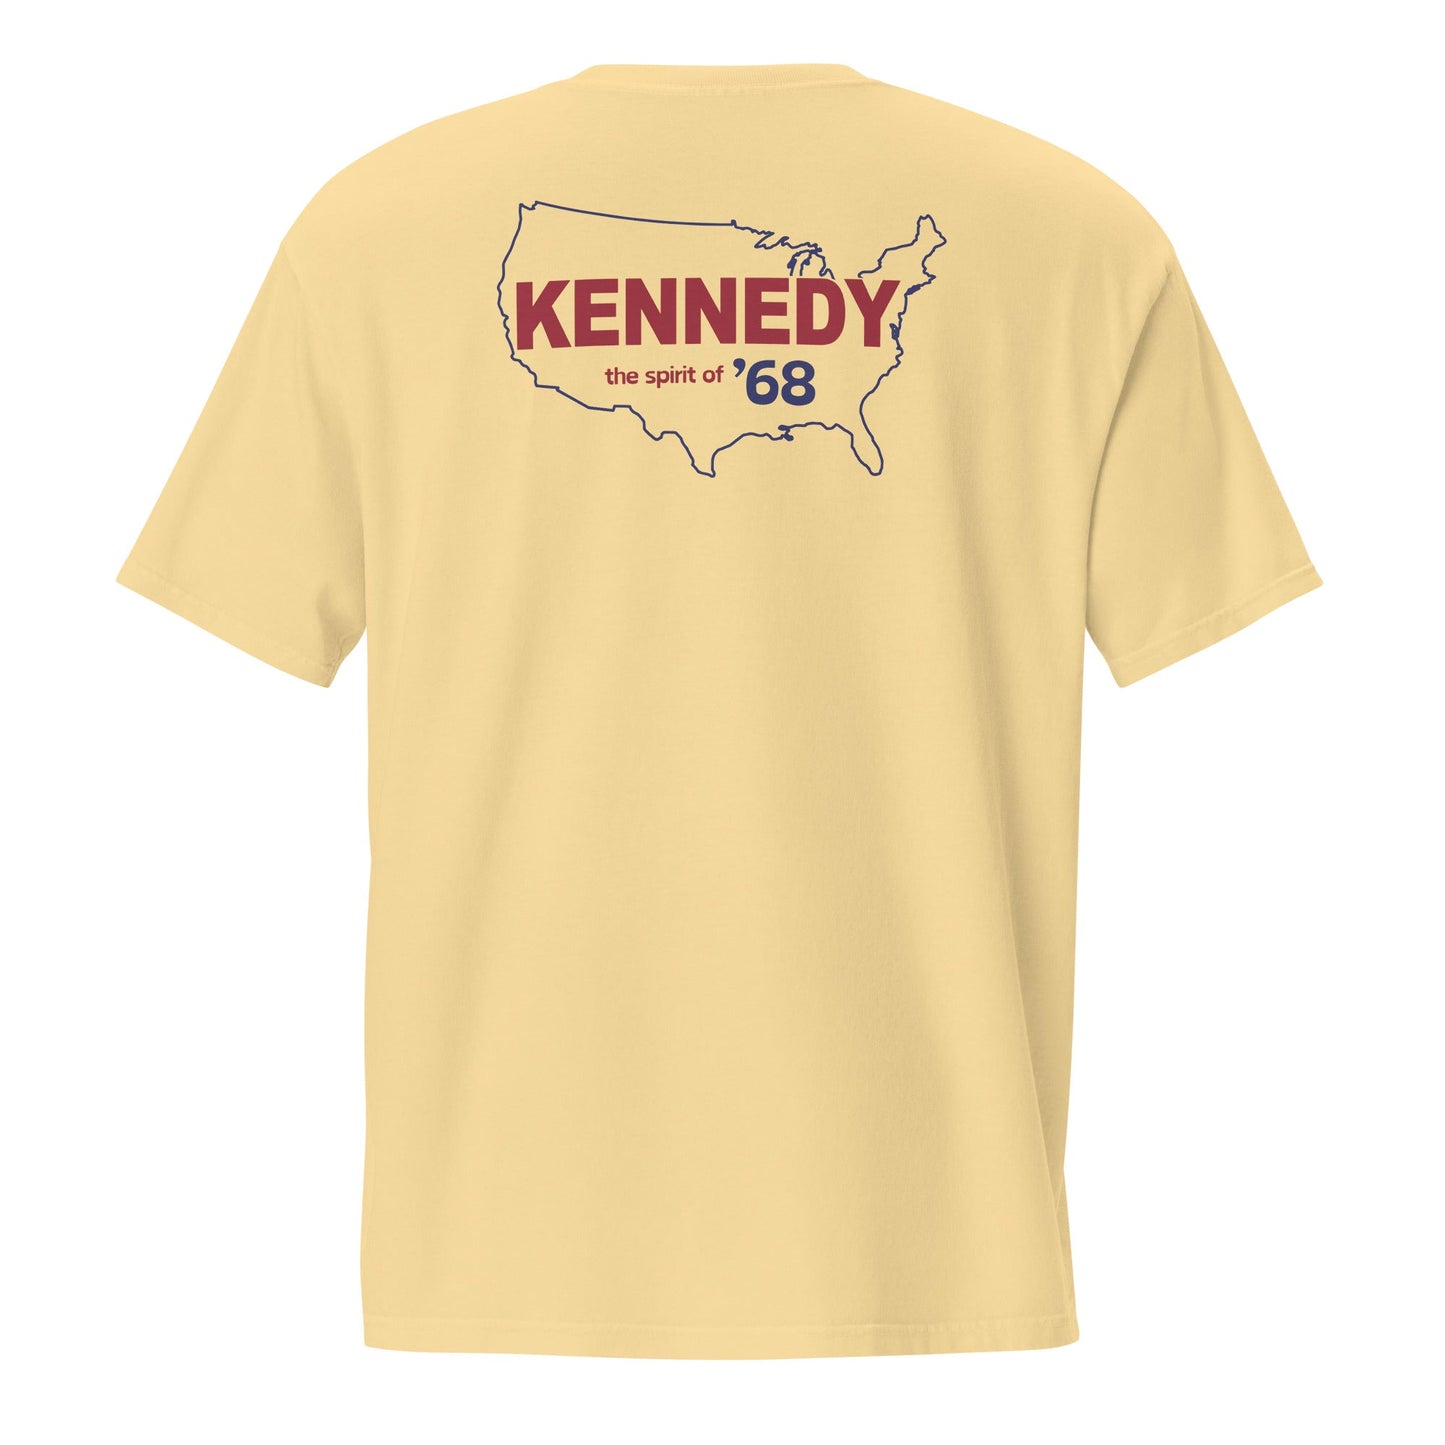 Kennedy Spirit of '68 Unisex Pocket Tee - TEAM KENNEDY. All rights reserved